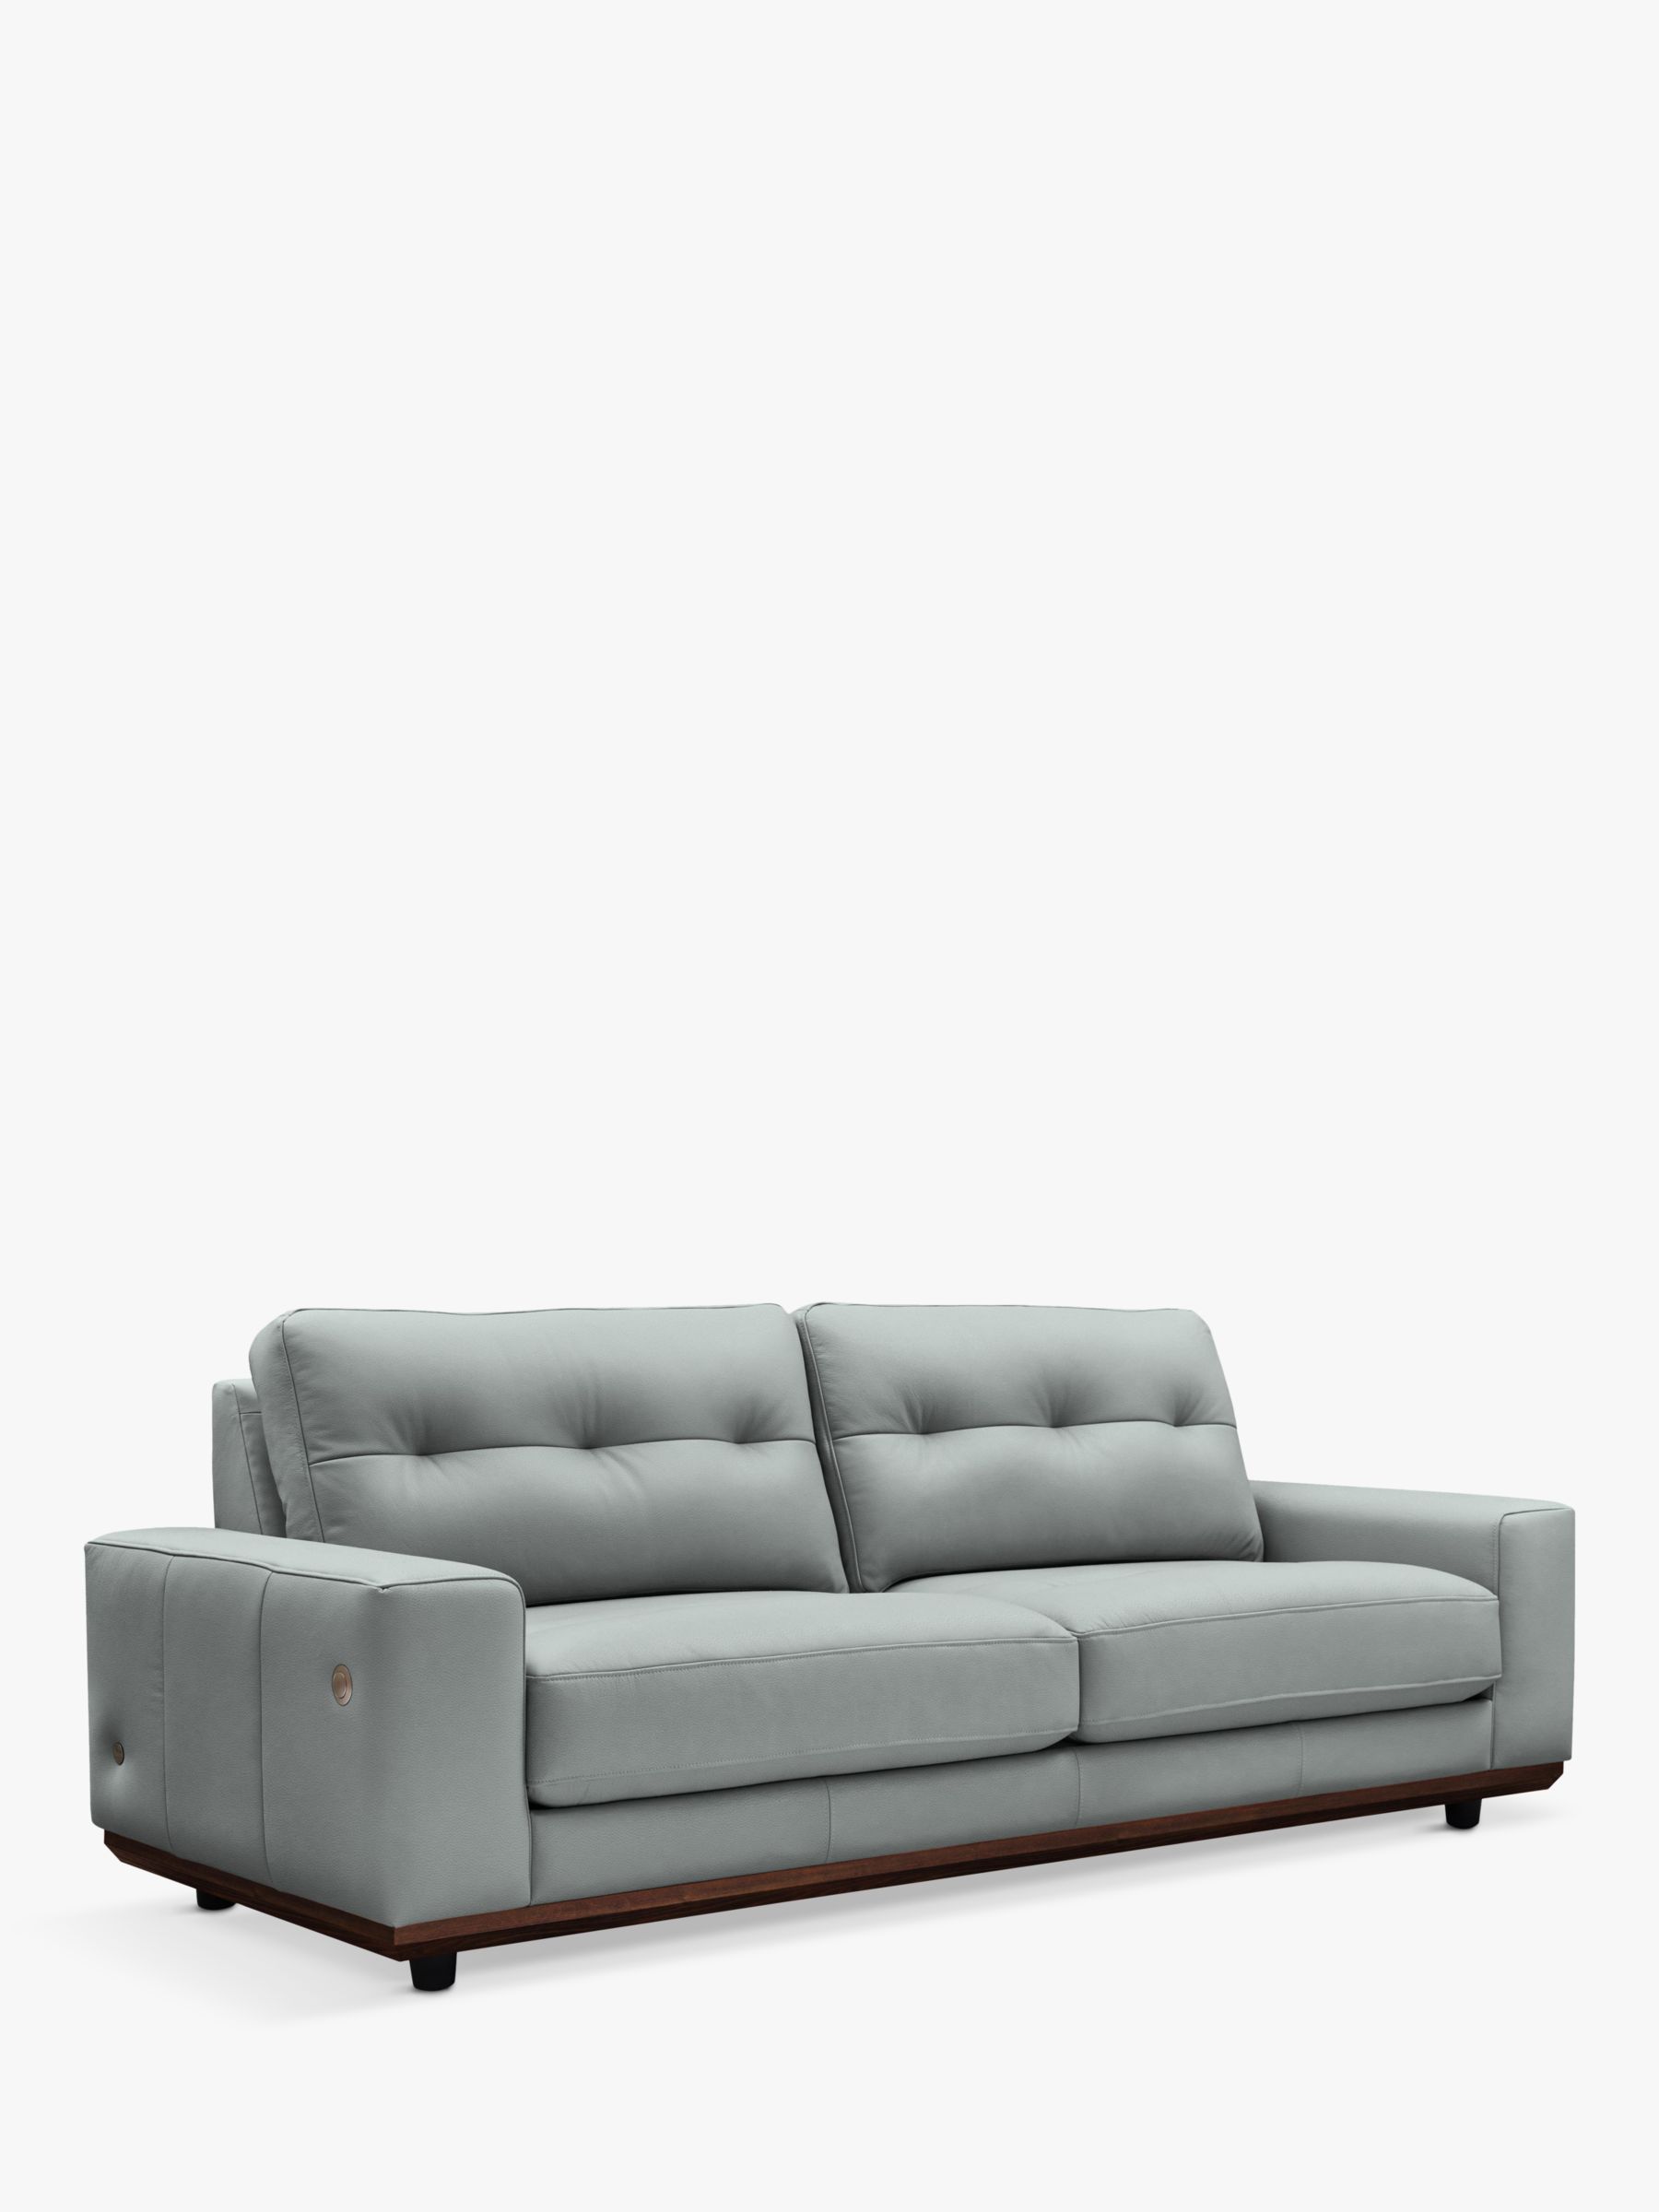 The Seventy One Range, G Plan Vintage The Seventy One with USB Charging Port Large 3 Seater Leather Sofa, Cambridge Grey